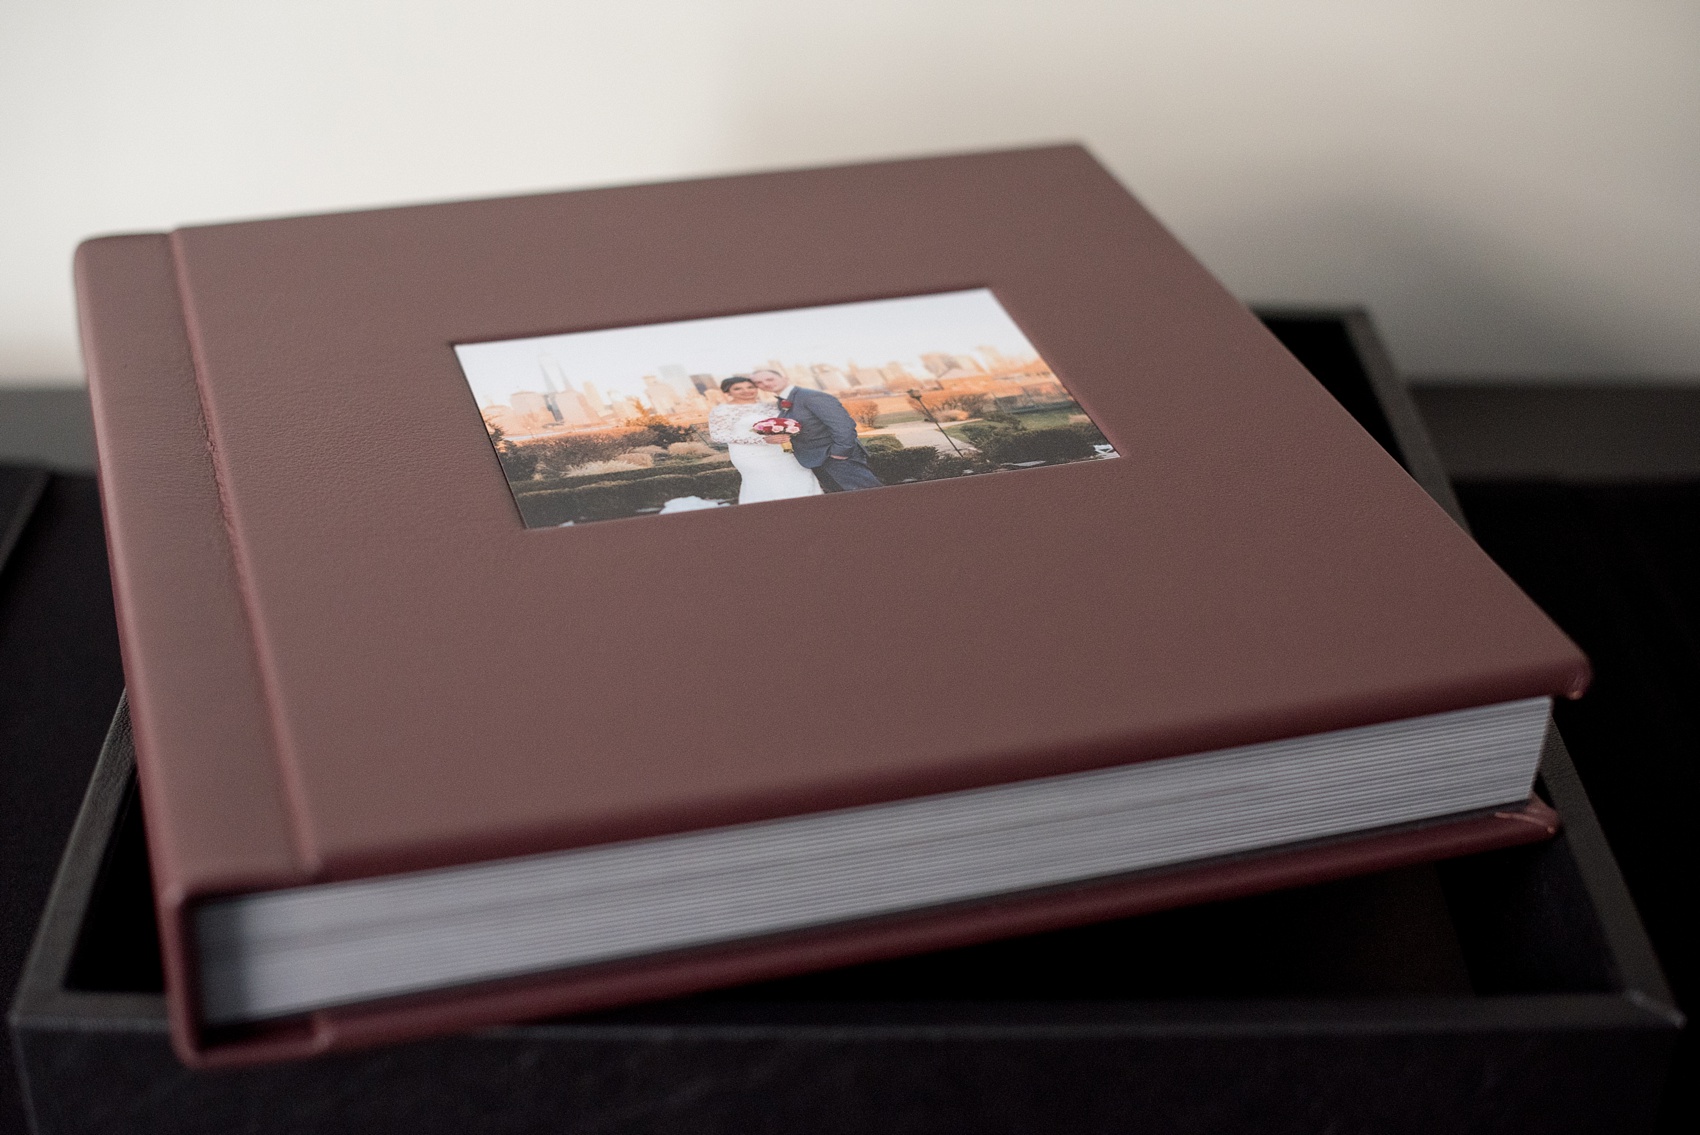 Mikkel Paige Photography photos of a fine art leather Madera wedding album in Oxblood. 12x12" album for the bride and groom with inset cover photo.